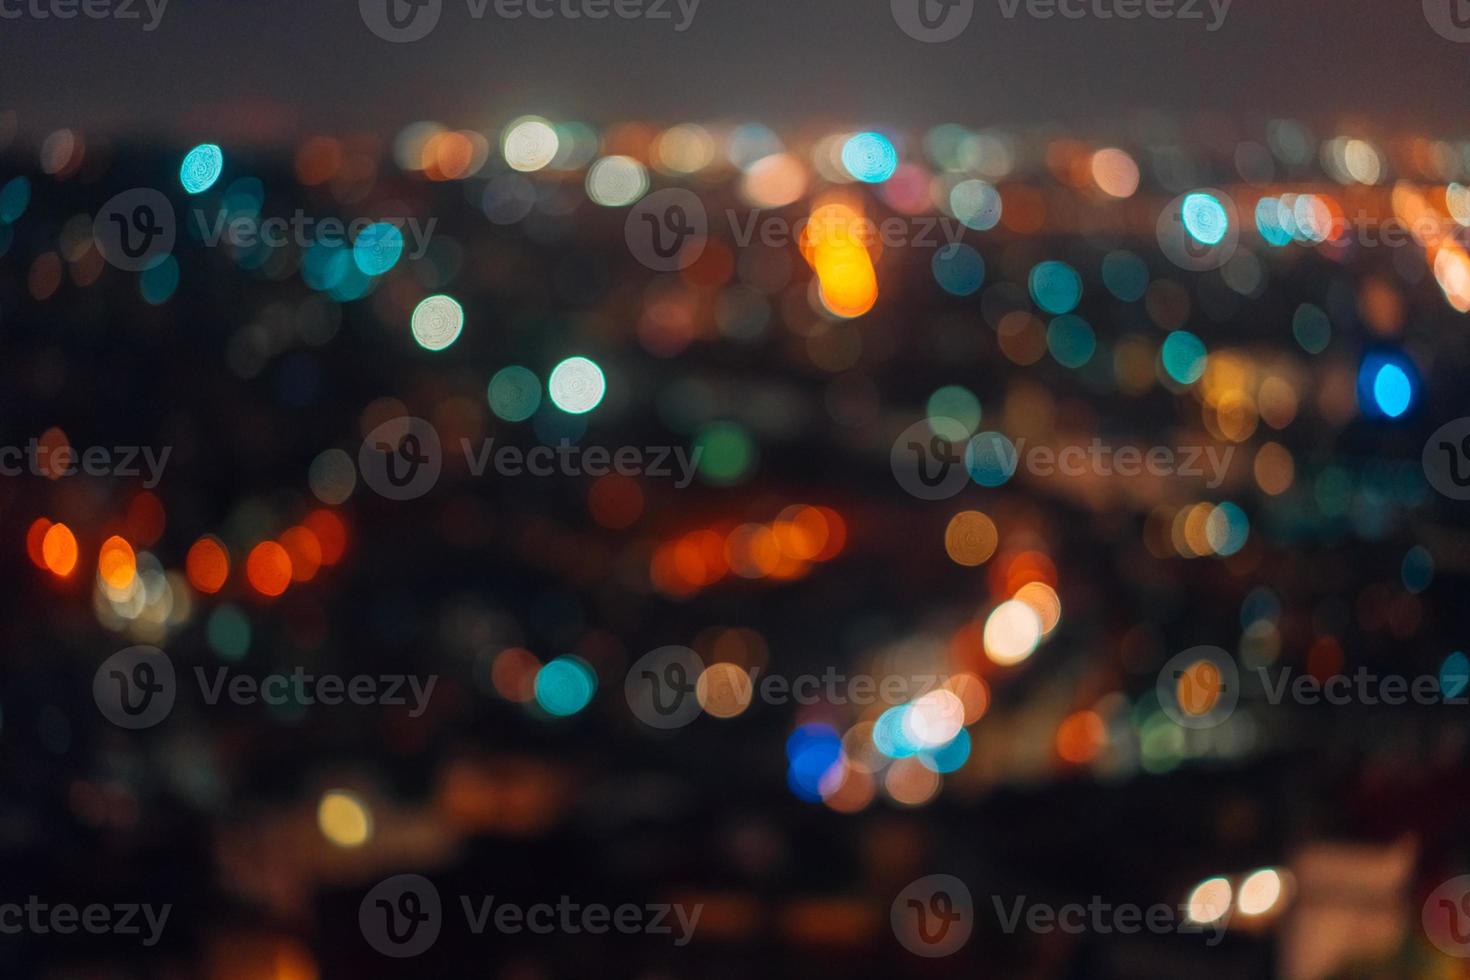 City night from top view. photo